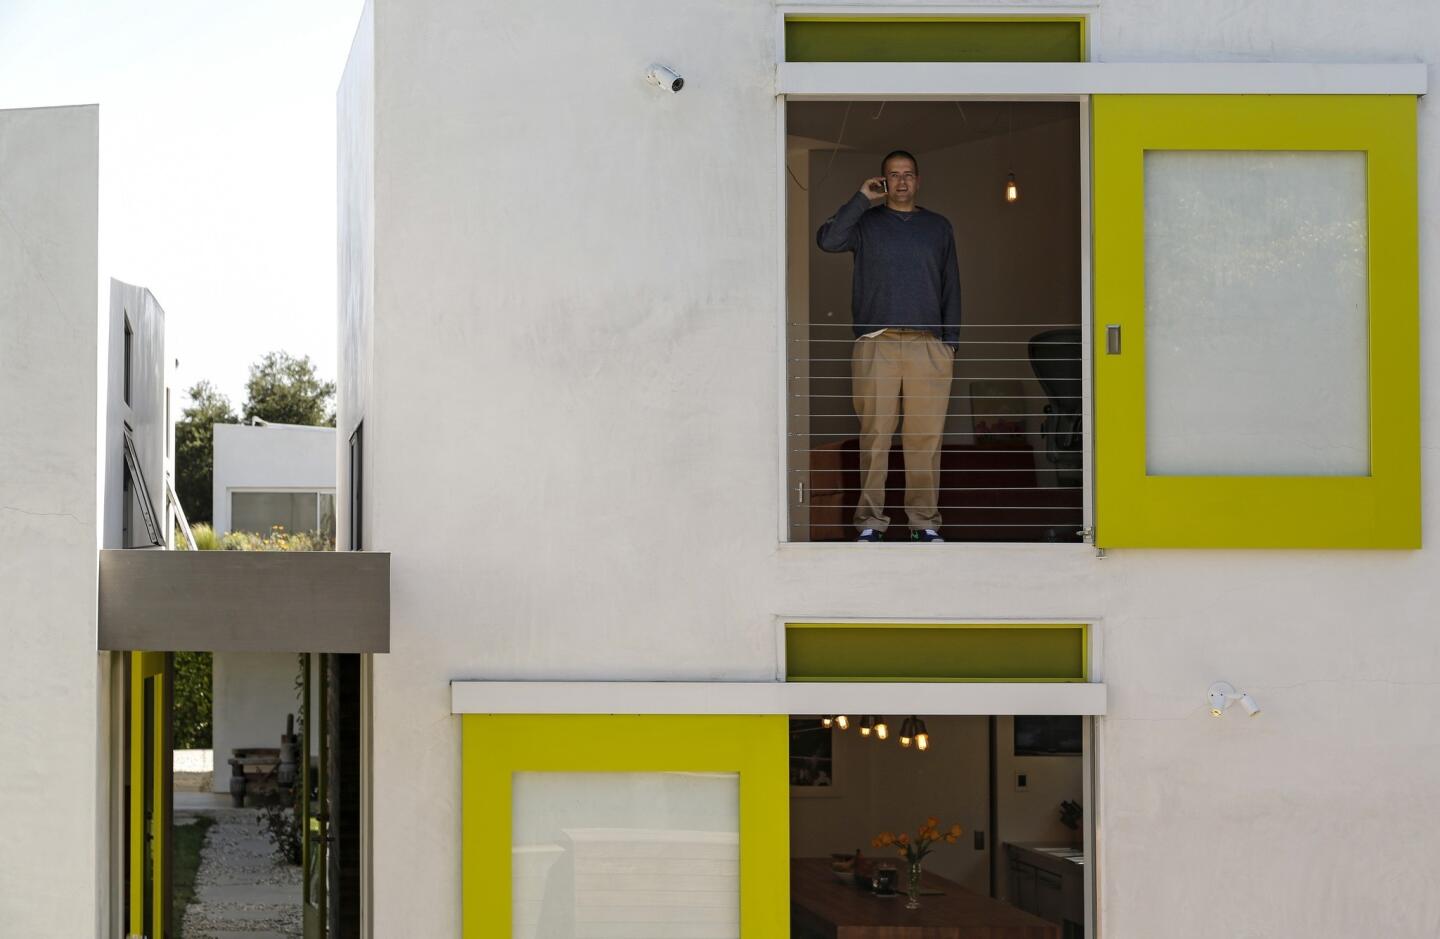 Jamie Sobieski stands at a second-floor doorway whose sliding track creates an arresting design as seen from the second floor of another building on the property.